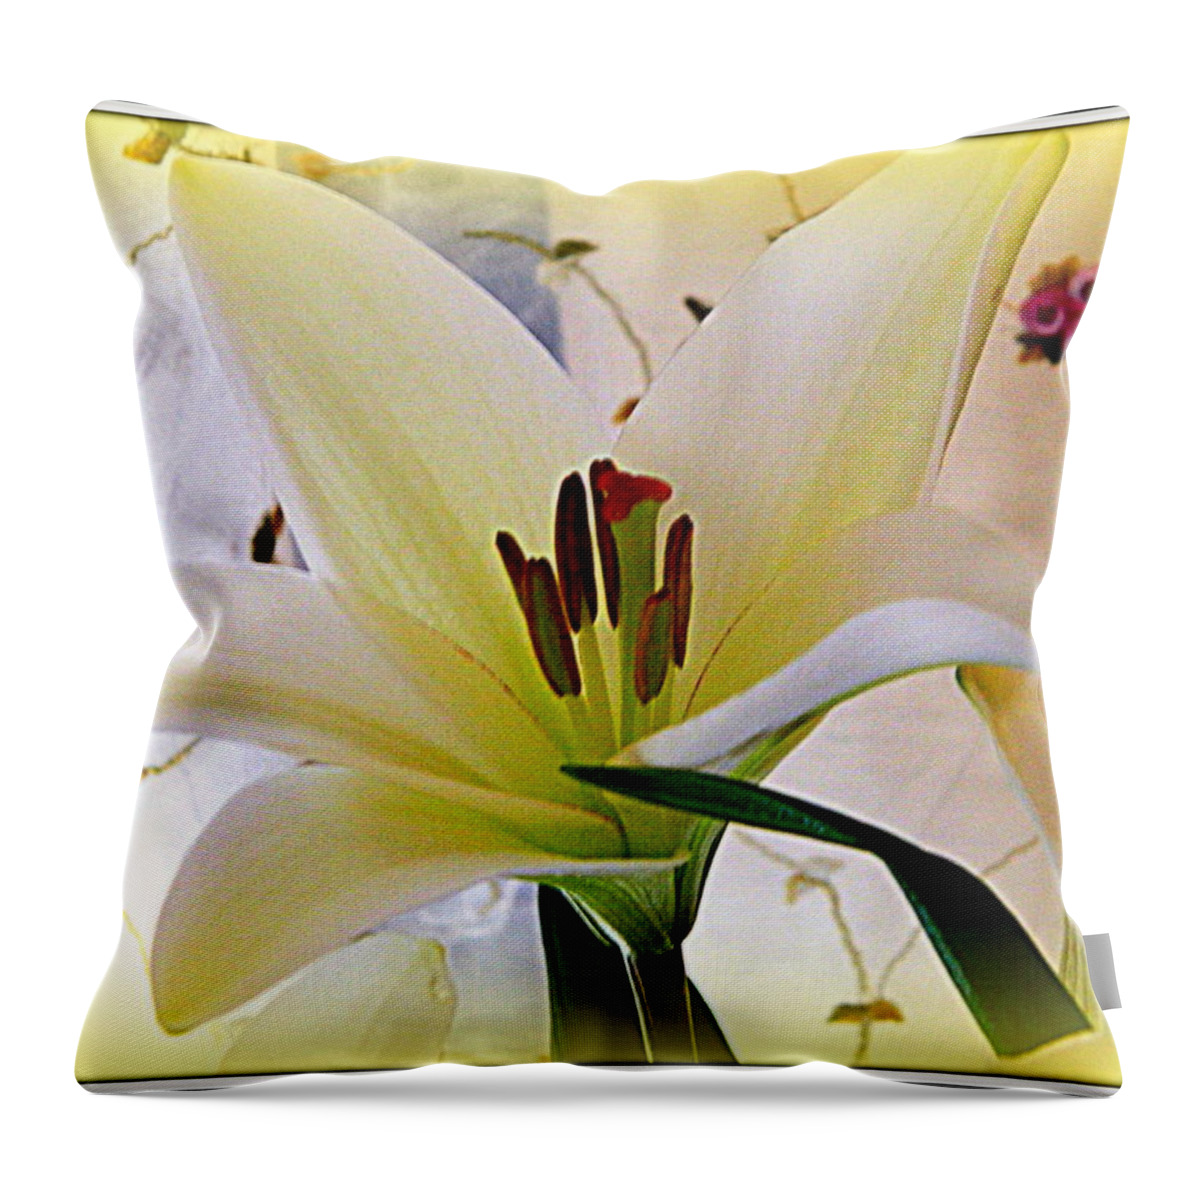 Bouquet Throw Pillow featuring the photograph The Lily by Kathy Barney